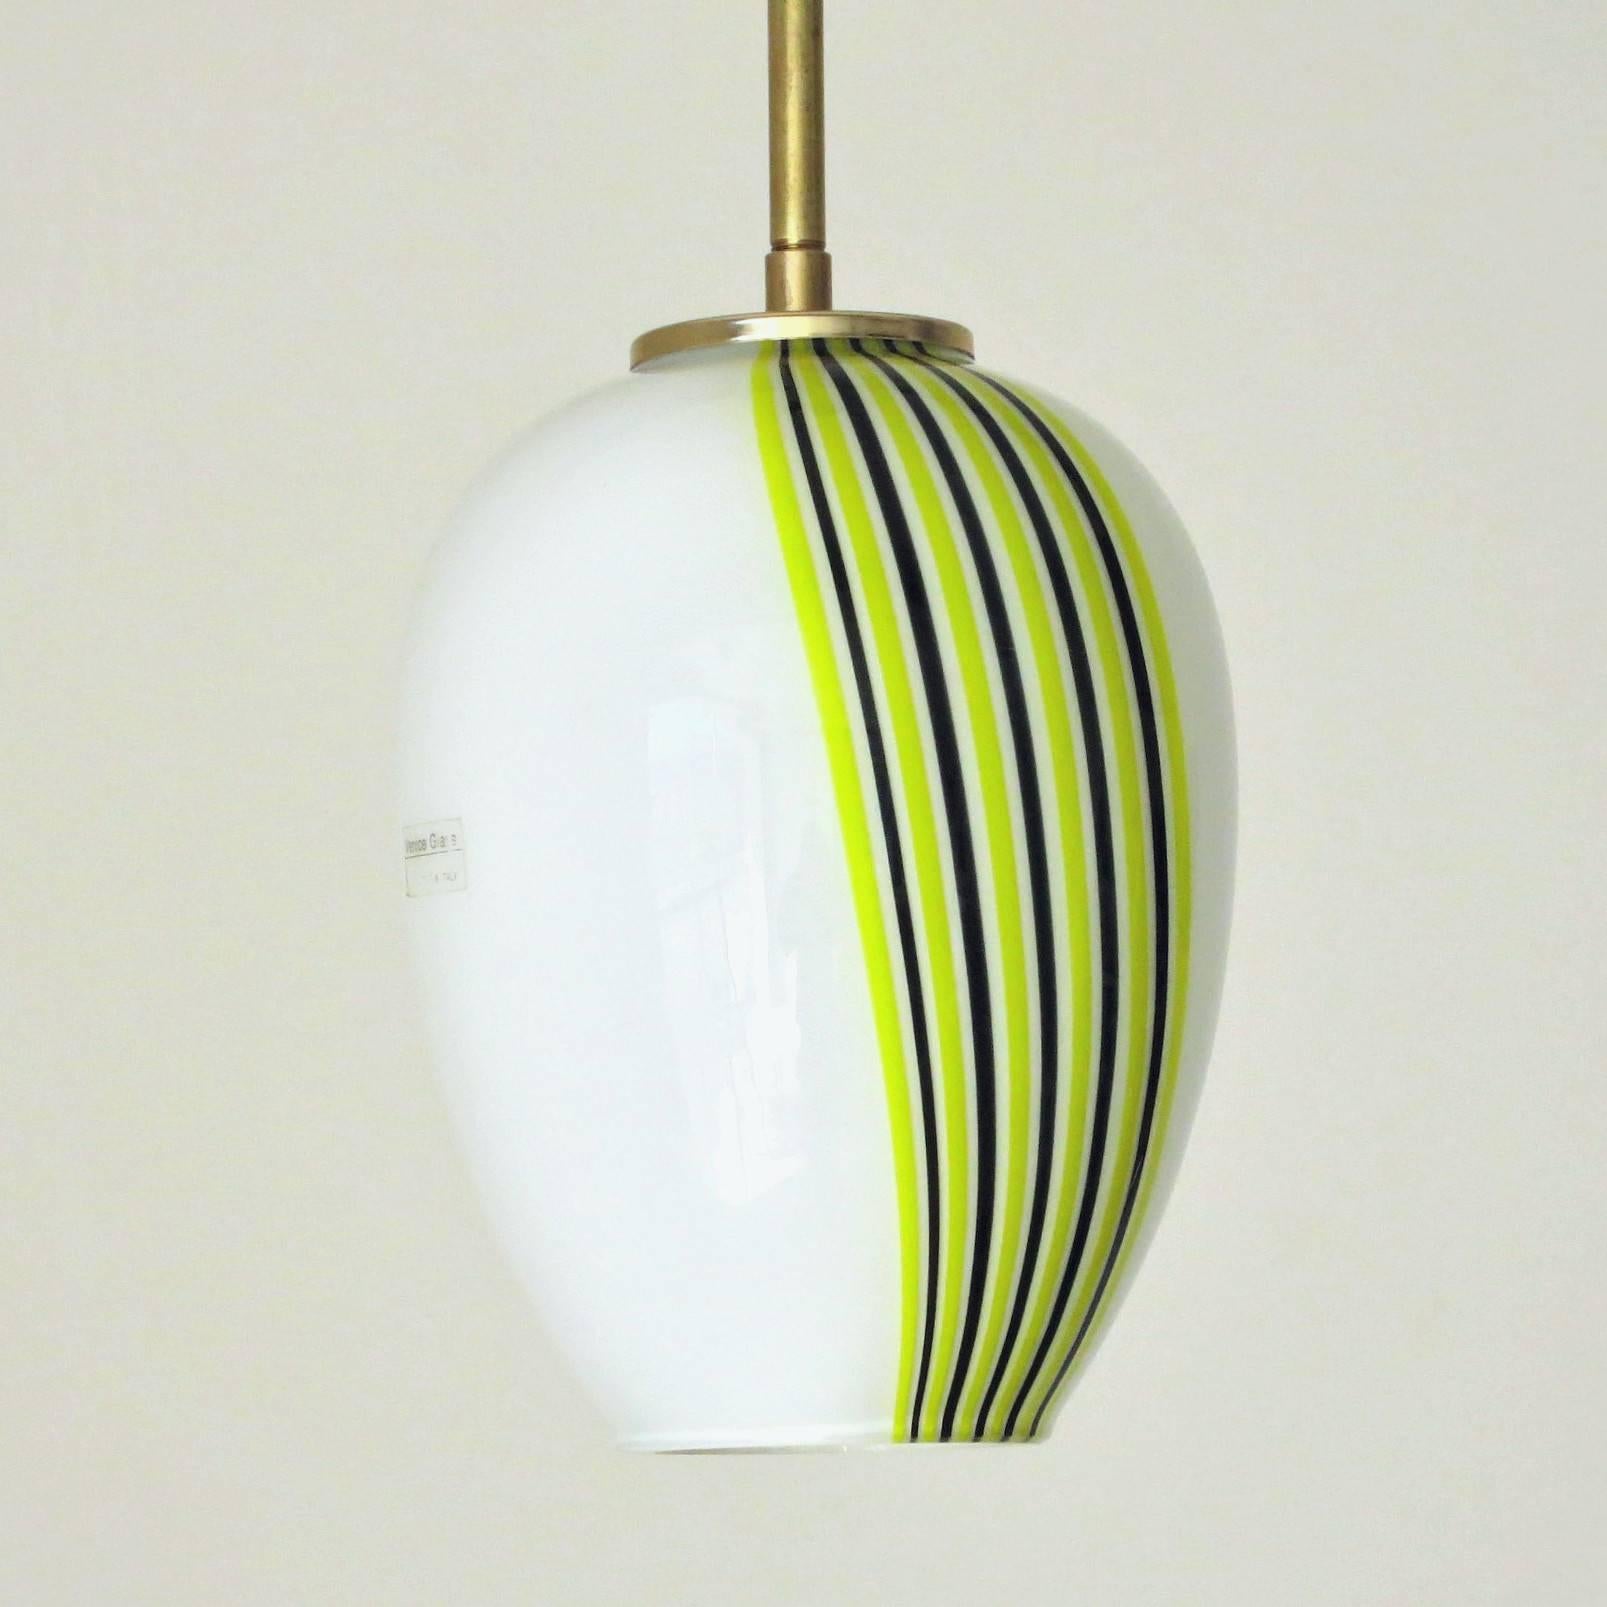 Vintage Italian pendant with white, green and black Murano glass delicately blown into a a single glass piece with striped design / Includes original sticker on the glass / Made in Italy circa 1960’s
1 light / E26 or E27 type / max 60W
Diameter: 6